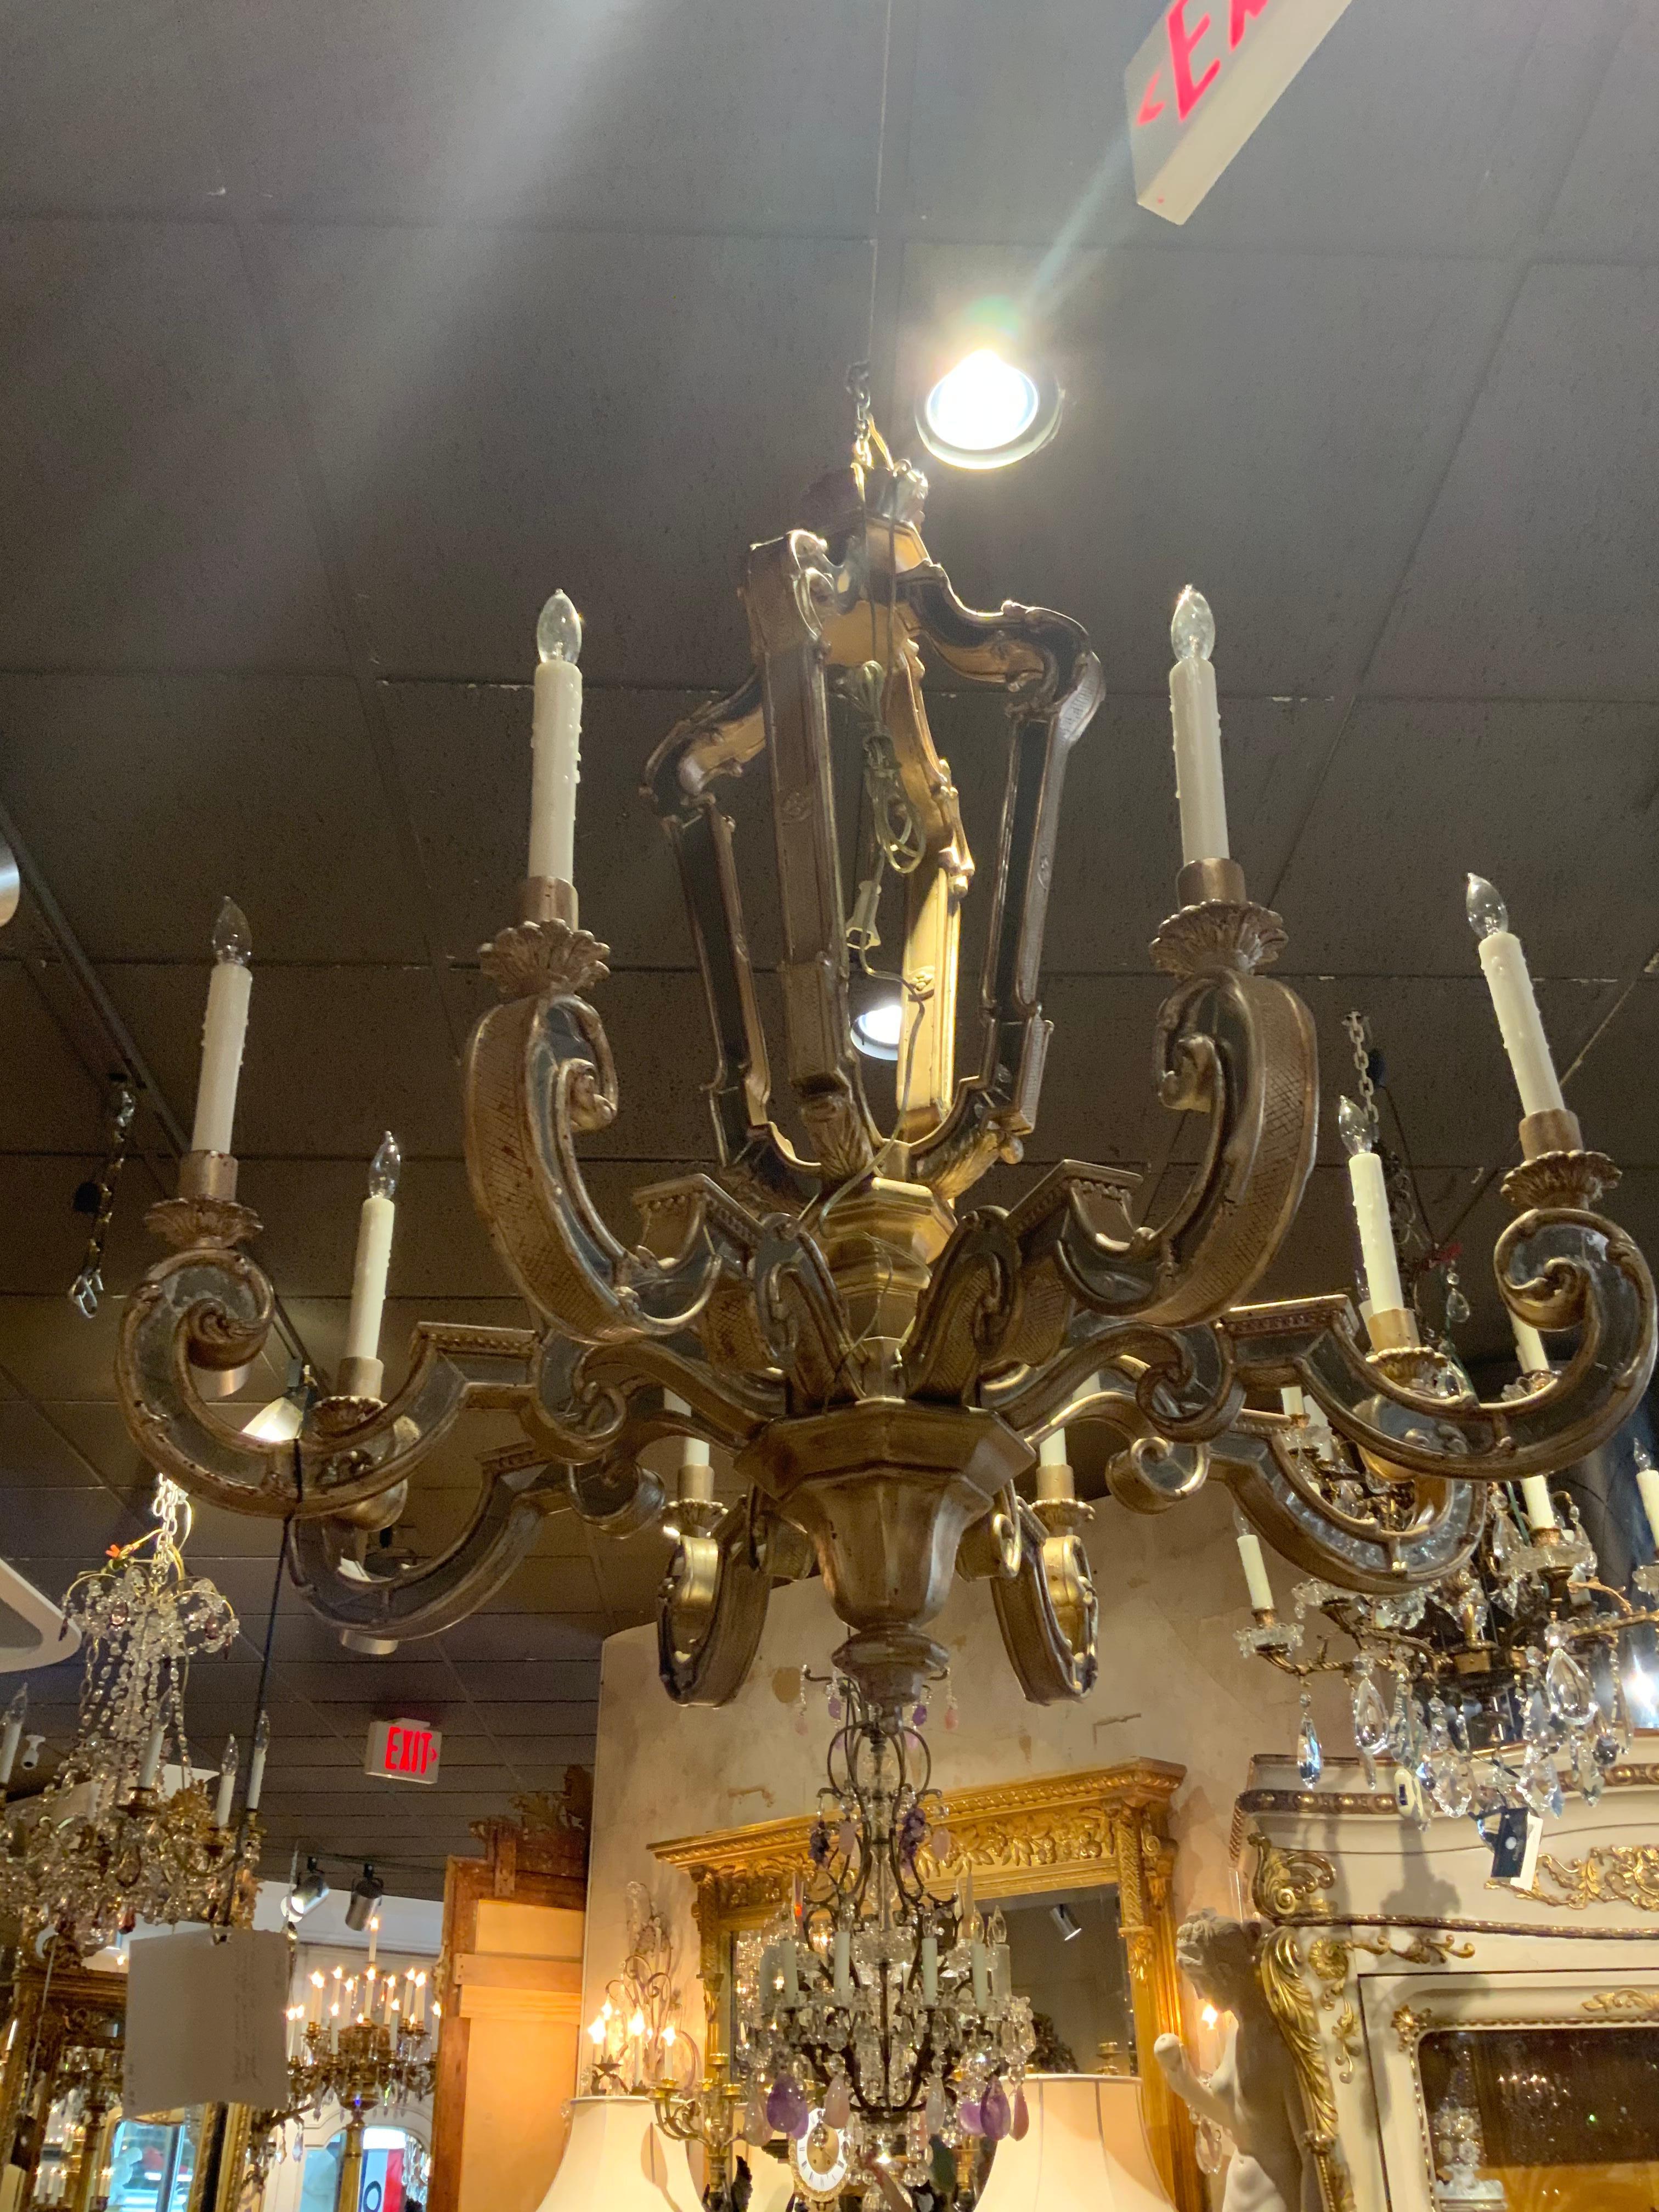 Hollywood Regency Silver Leaf Wood Carved Chandelier with Mirrors Inlaid and Scrolling Arms